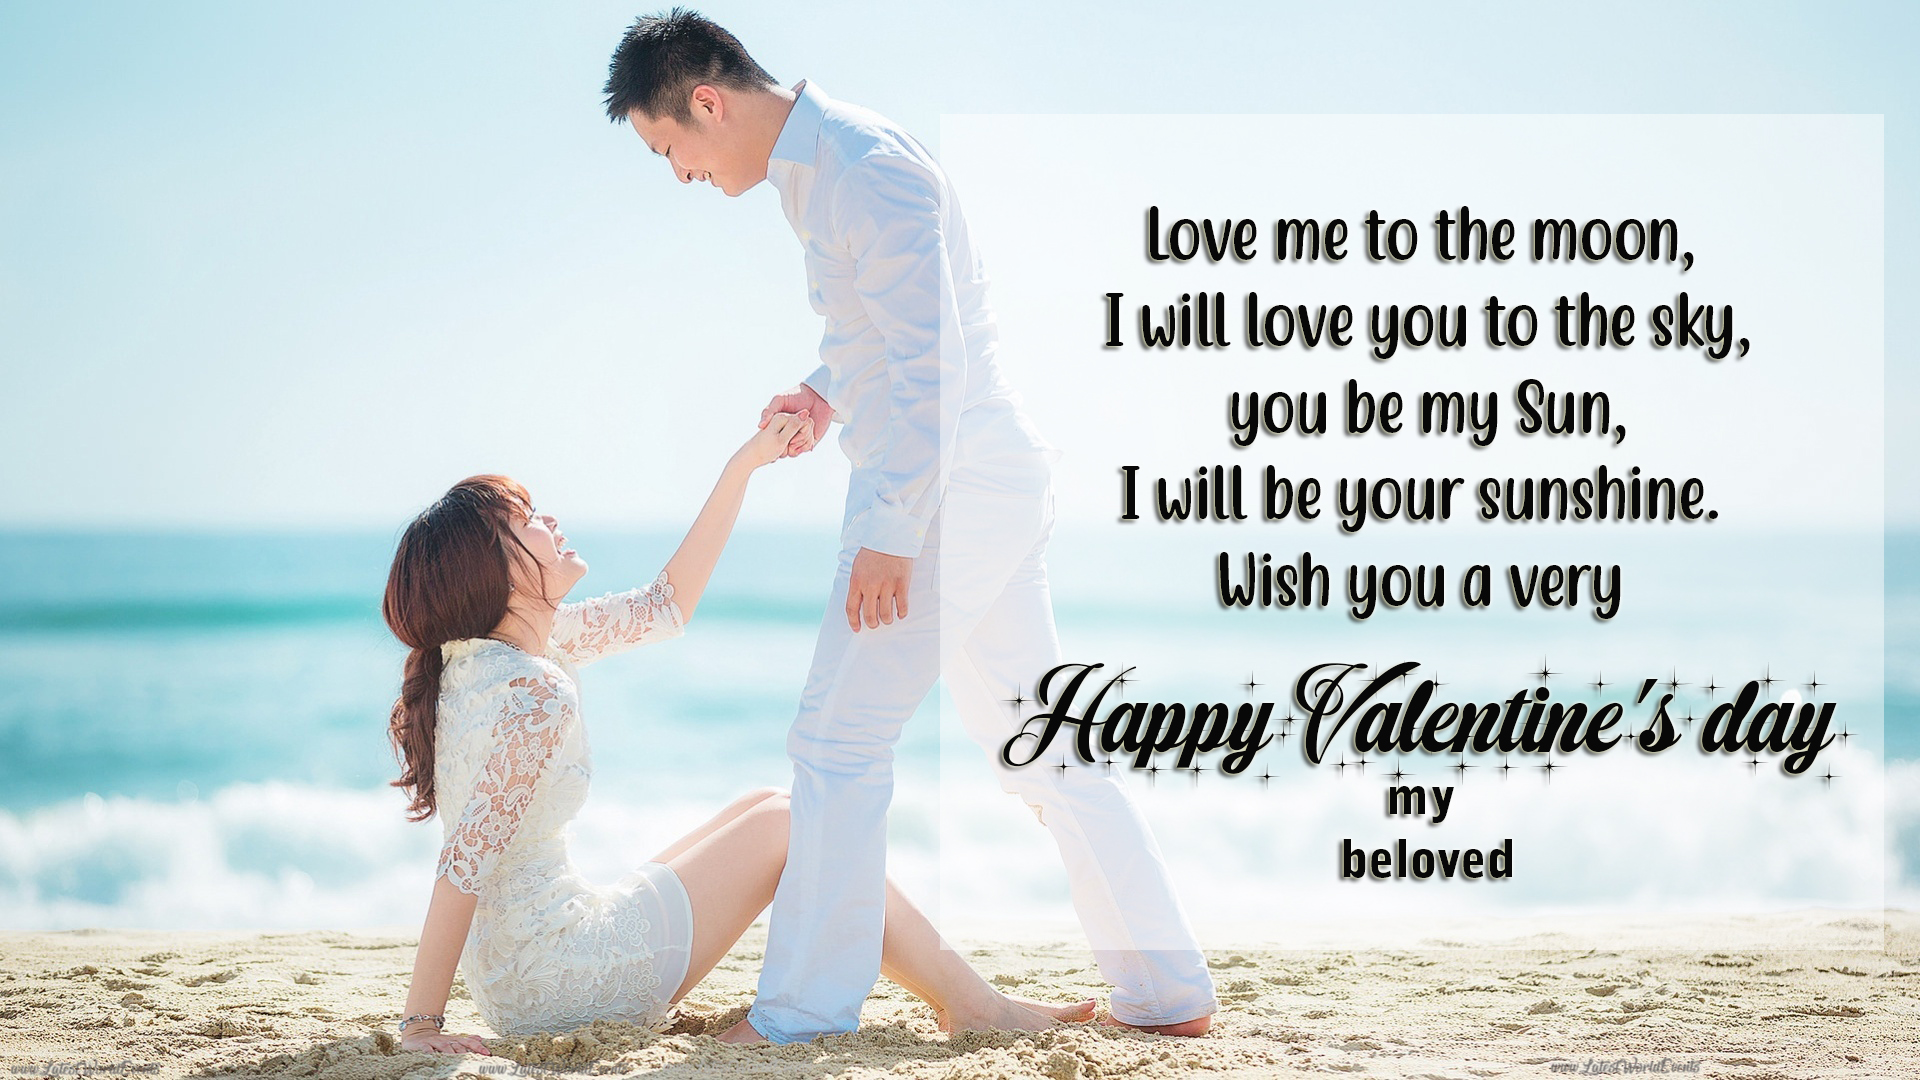 Download-inspirational-valentine-quotes